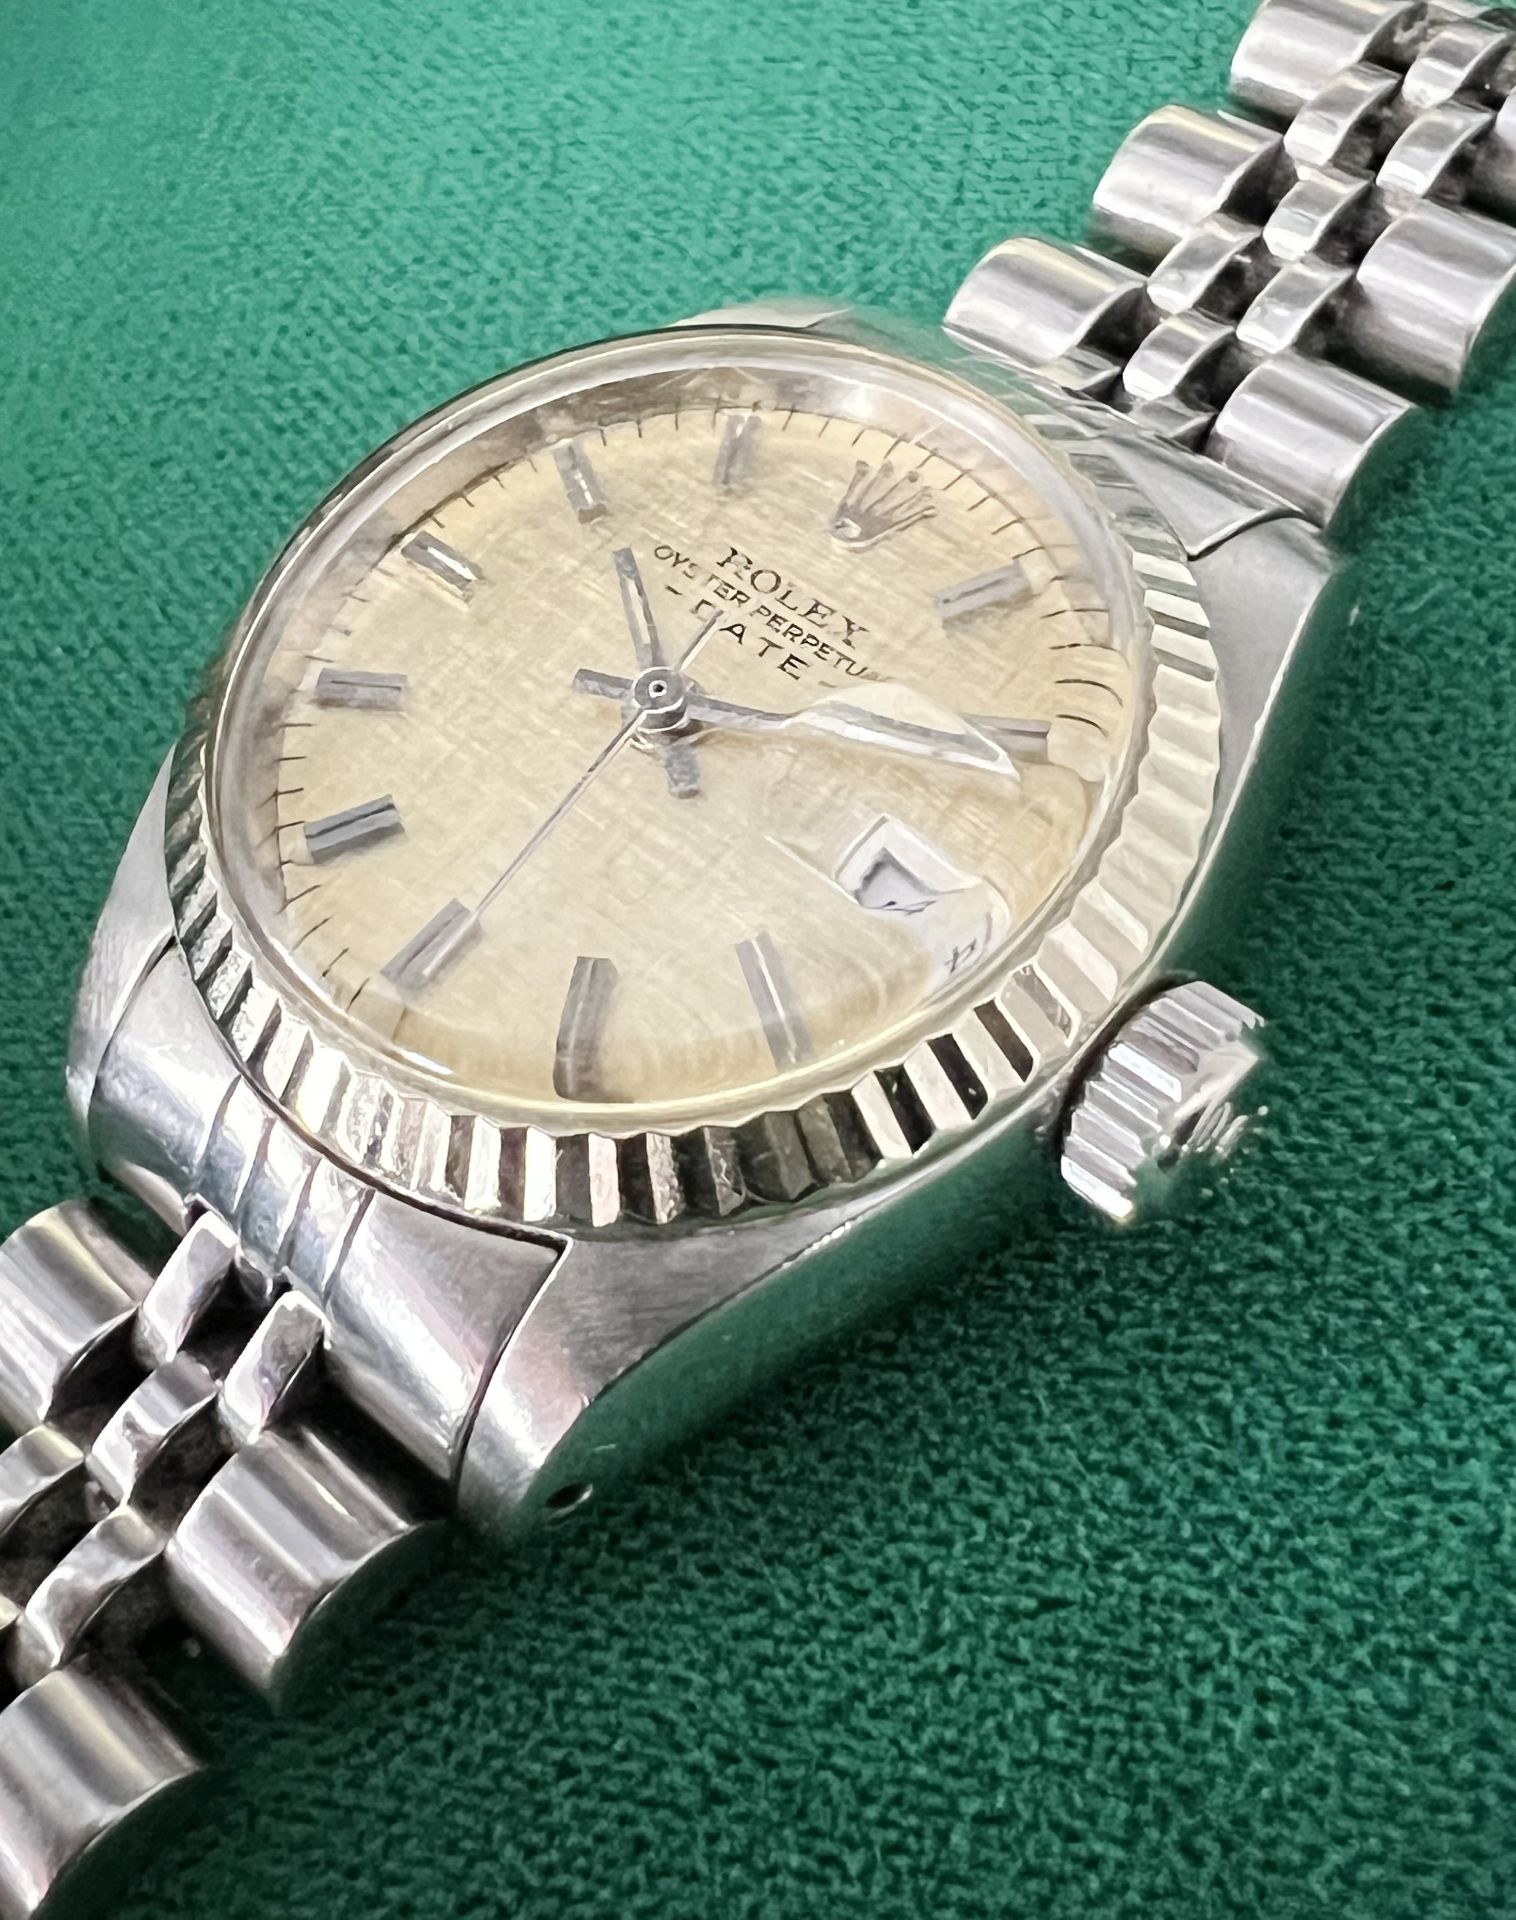 Ladies' wristwatch ROLEX Oyster Perpetual. Lady Date. Fullset. With replacement links. - Image 5 of 11